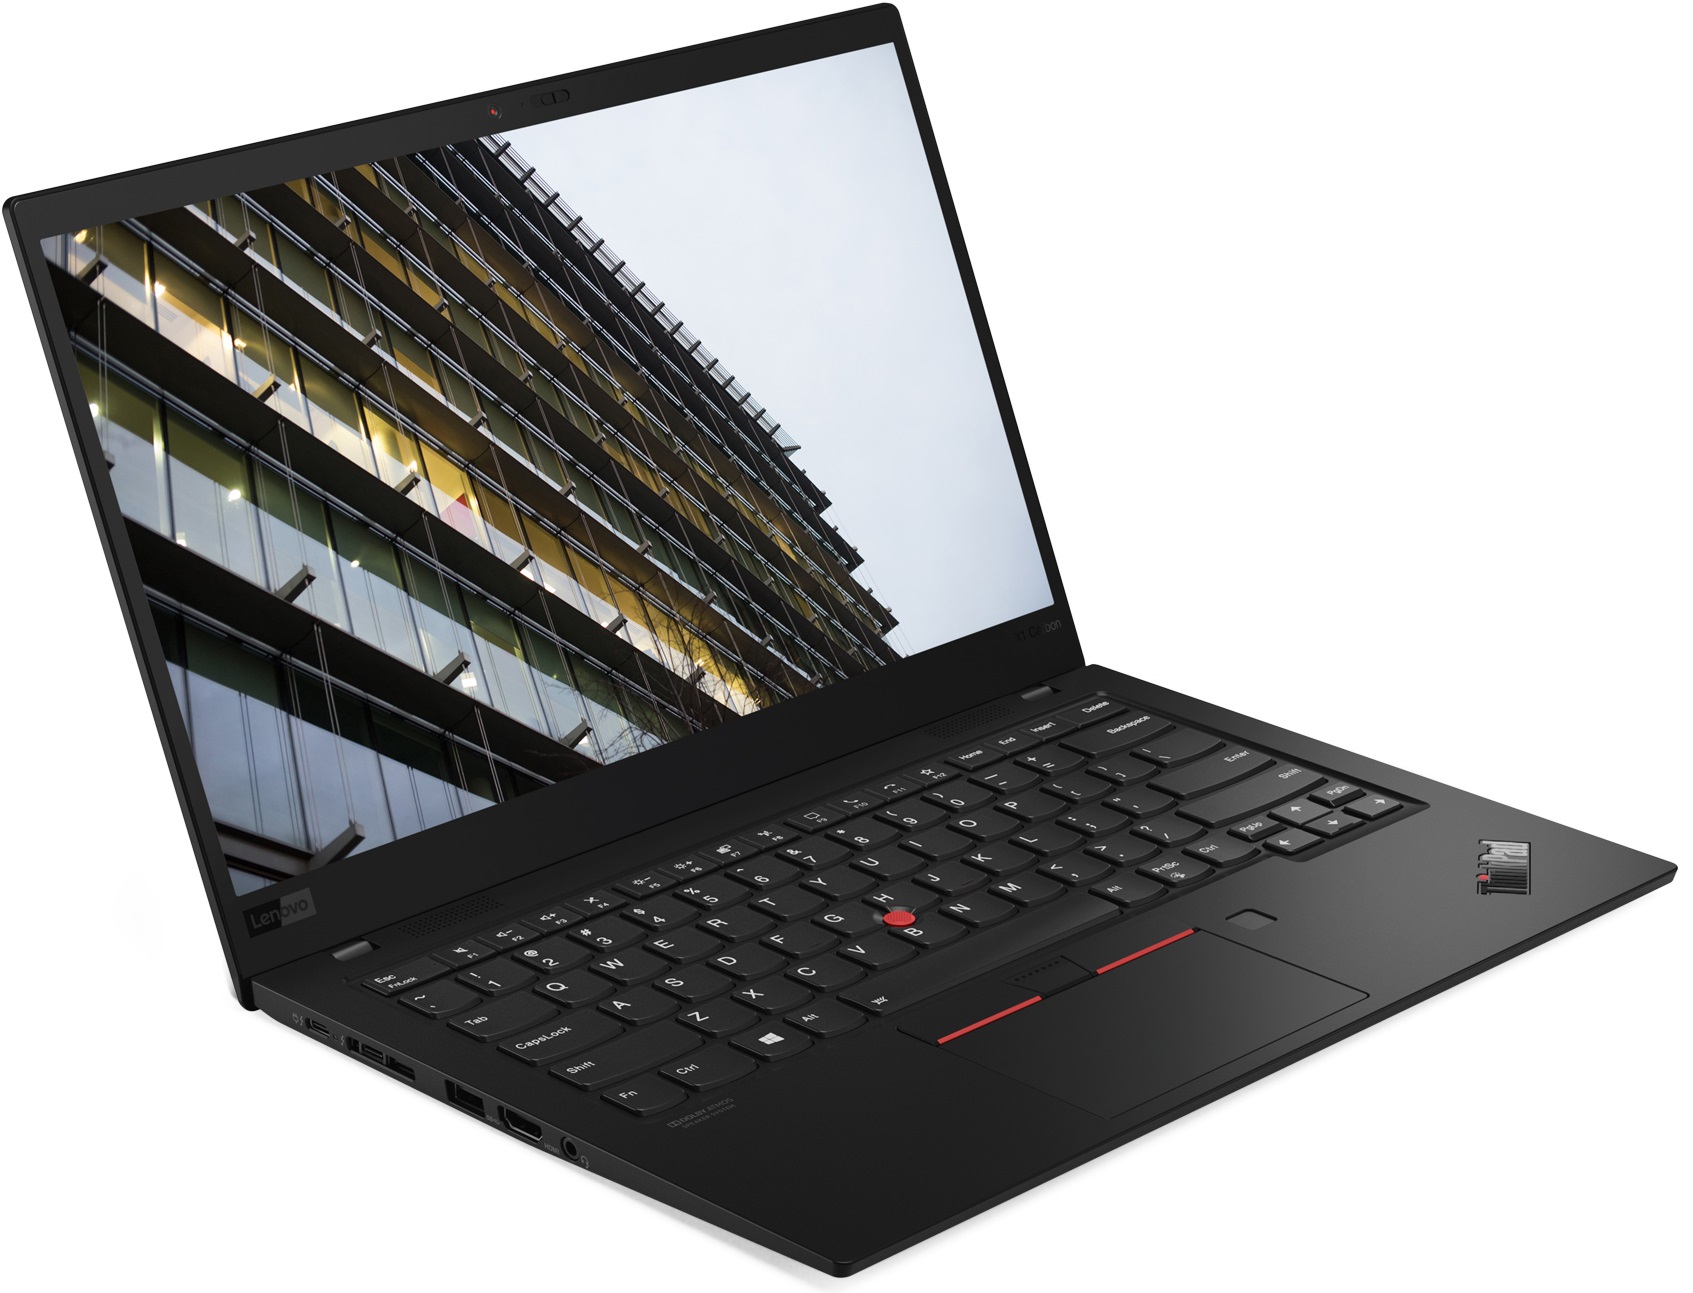 Lenovo ThinkPad X1 Carbon (8th Gen, 2020) - Specs, Tests, and